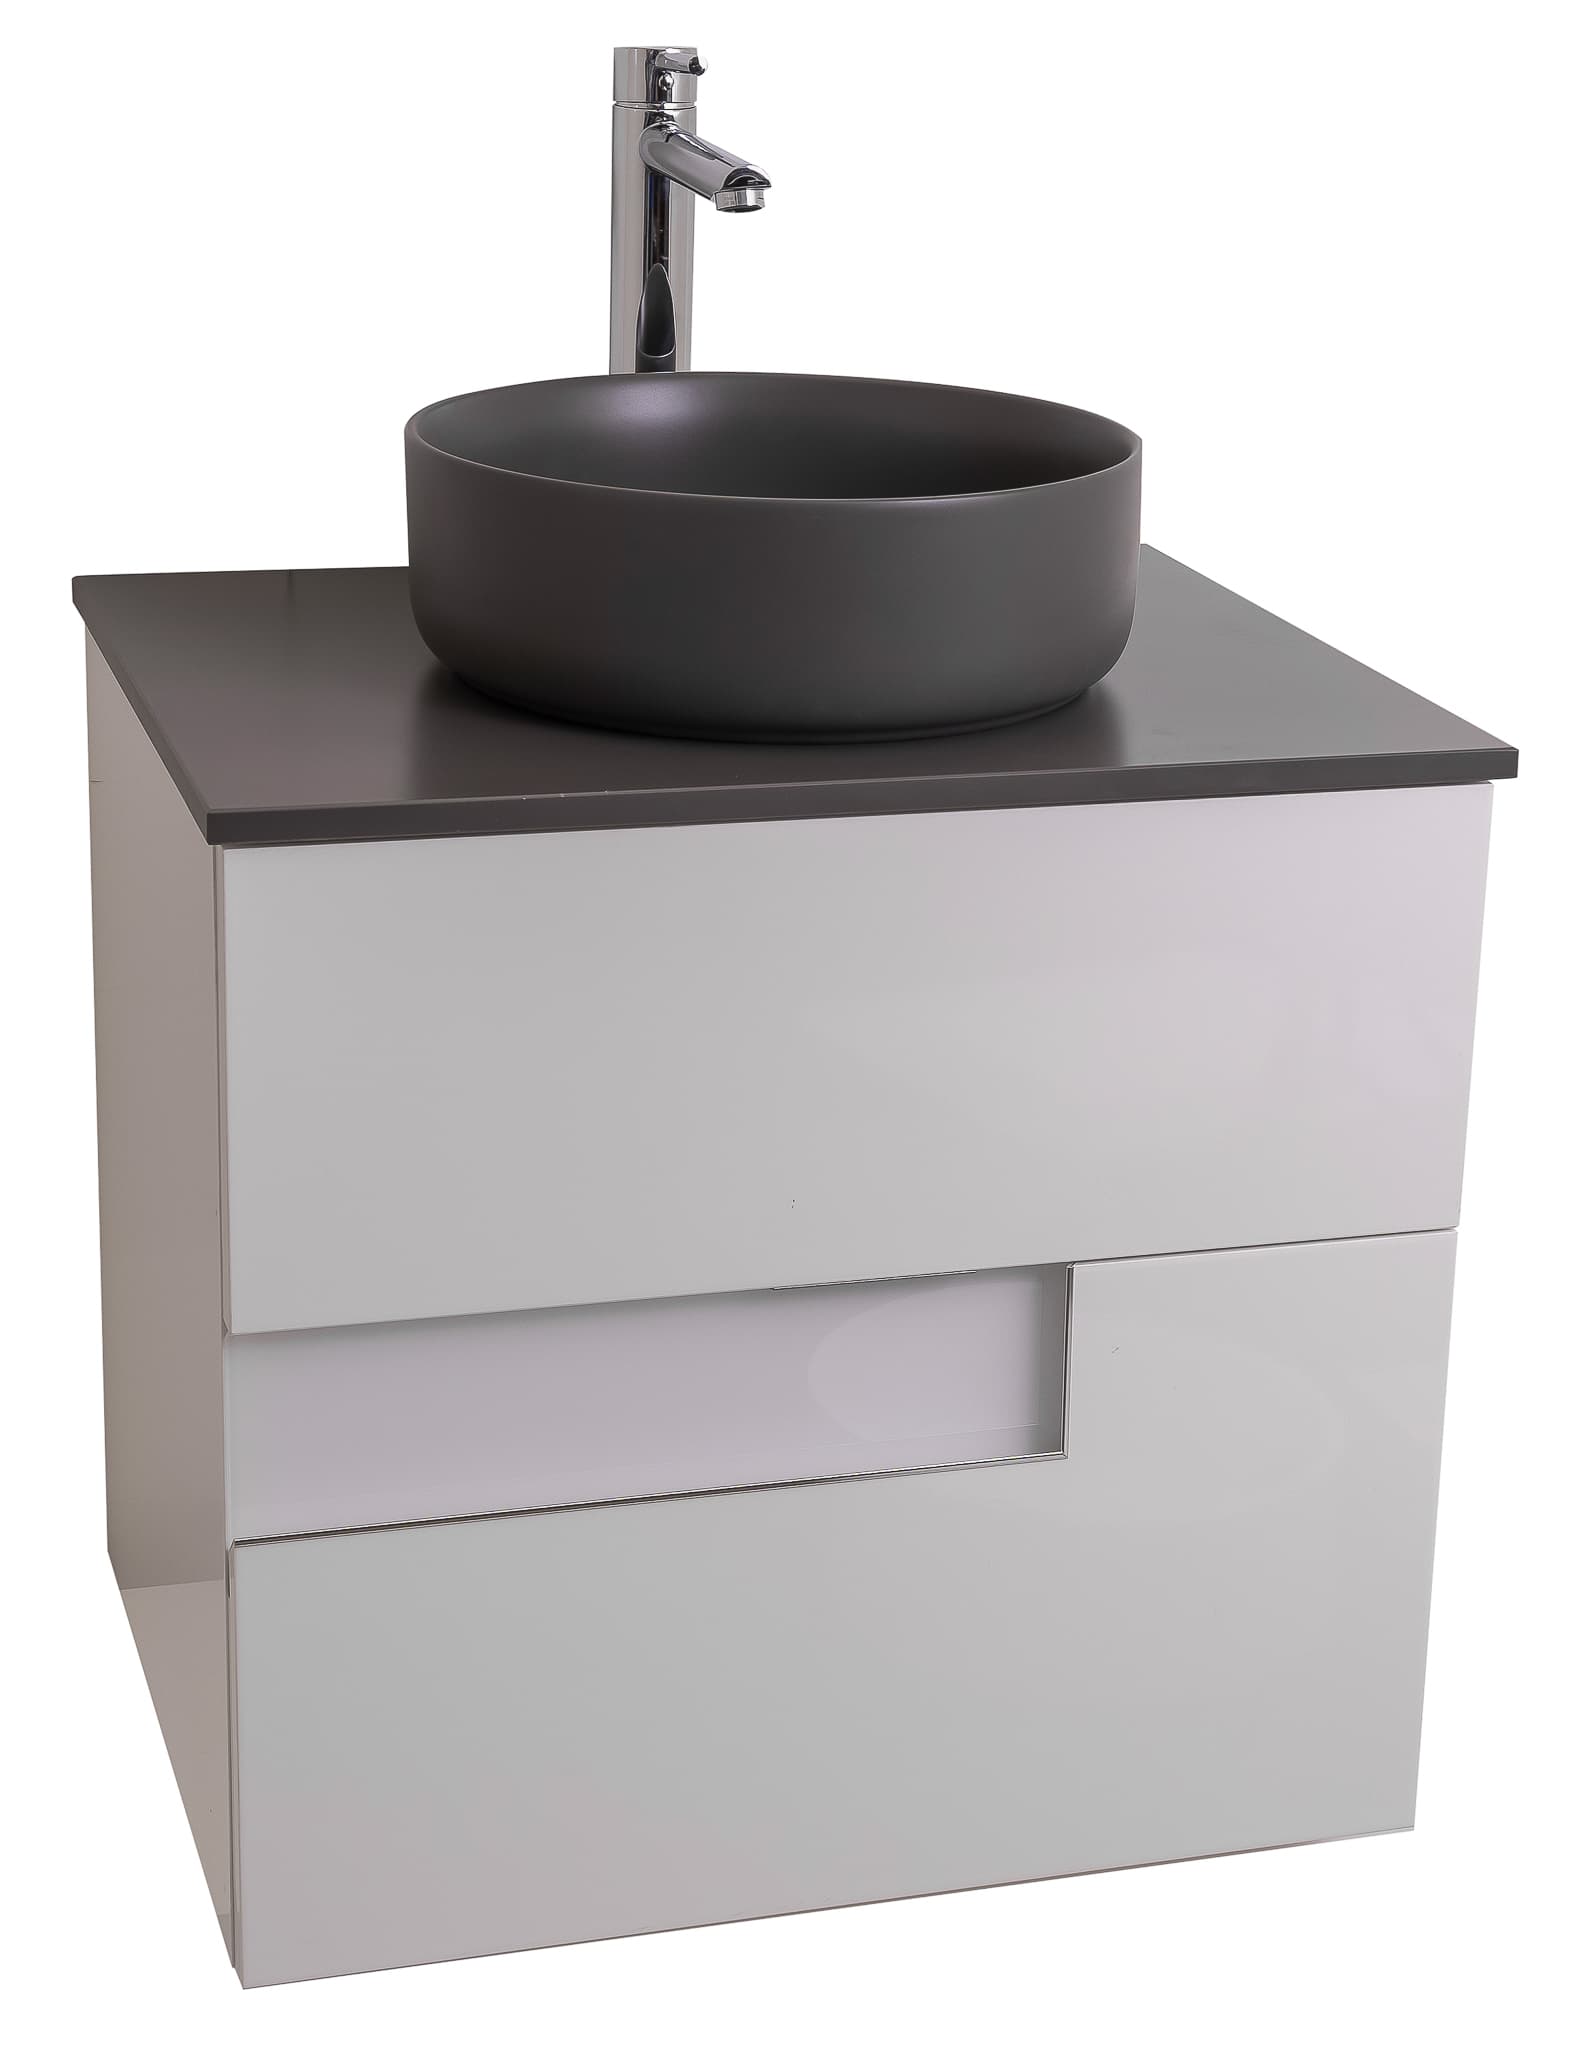 Vision 23.5 White High Gloss Cabinet, Ares Grey Ceniza Top And Ares Grey Ceniza Ceramic Basin, Wall Mounted Modern Vanity Set